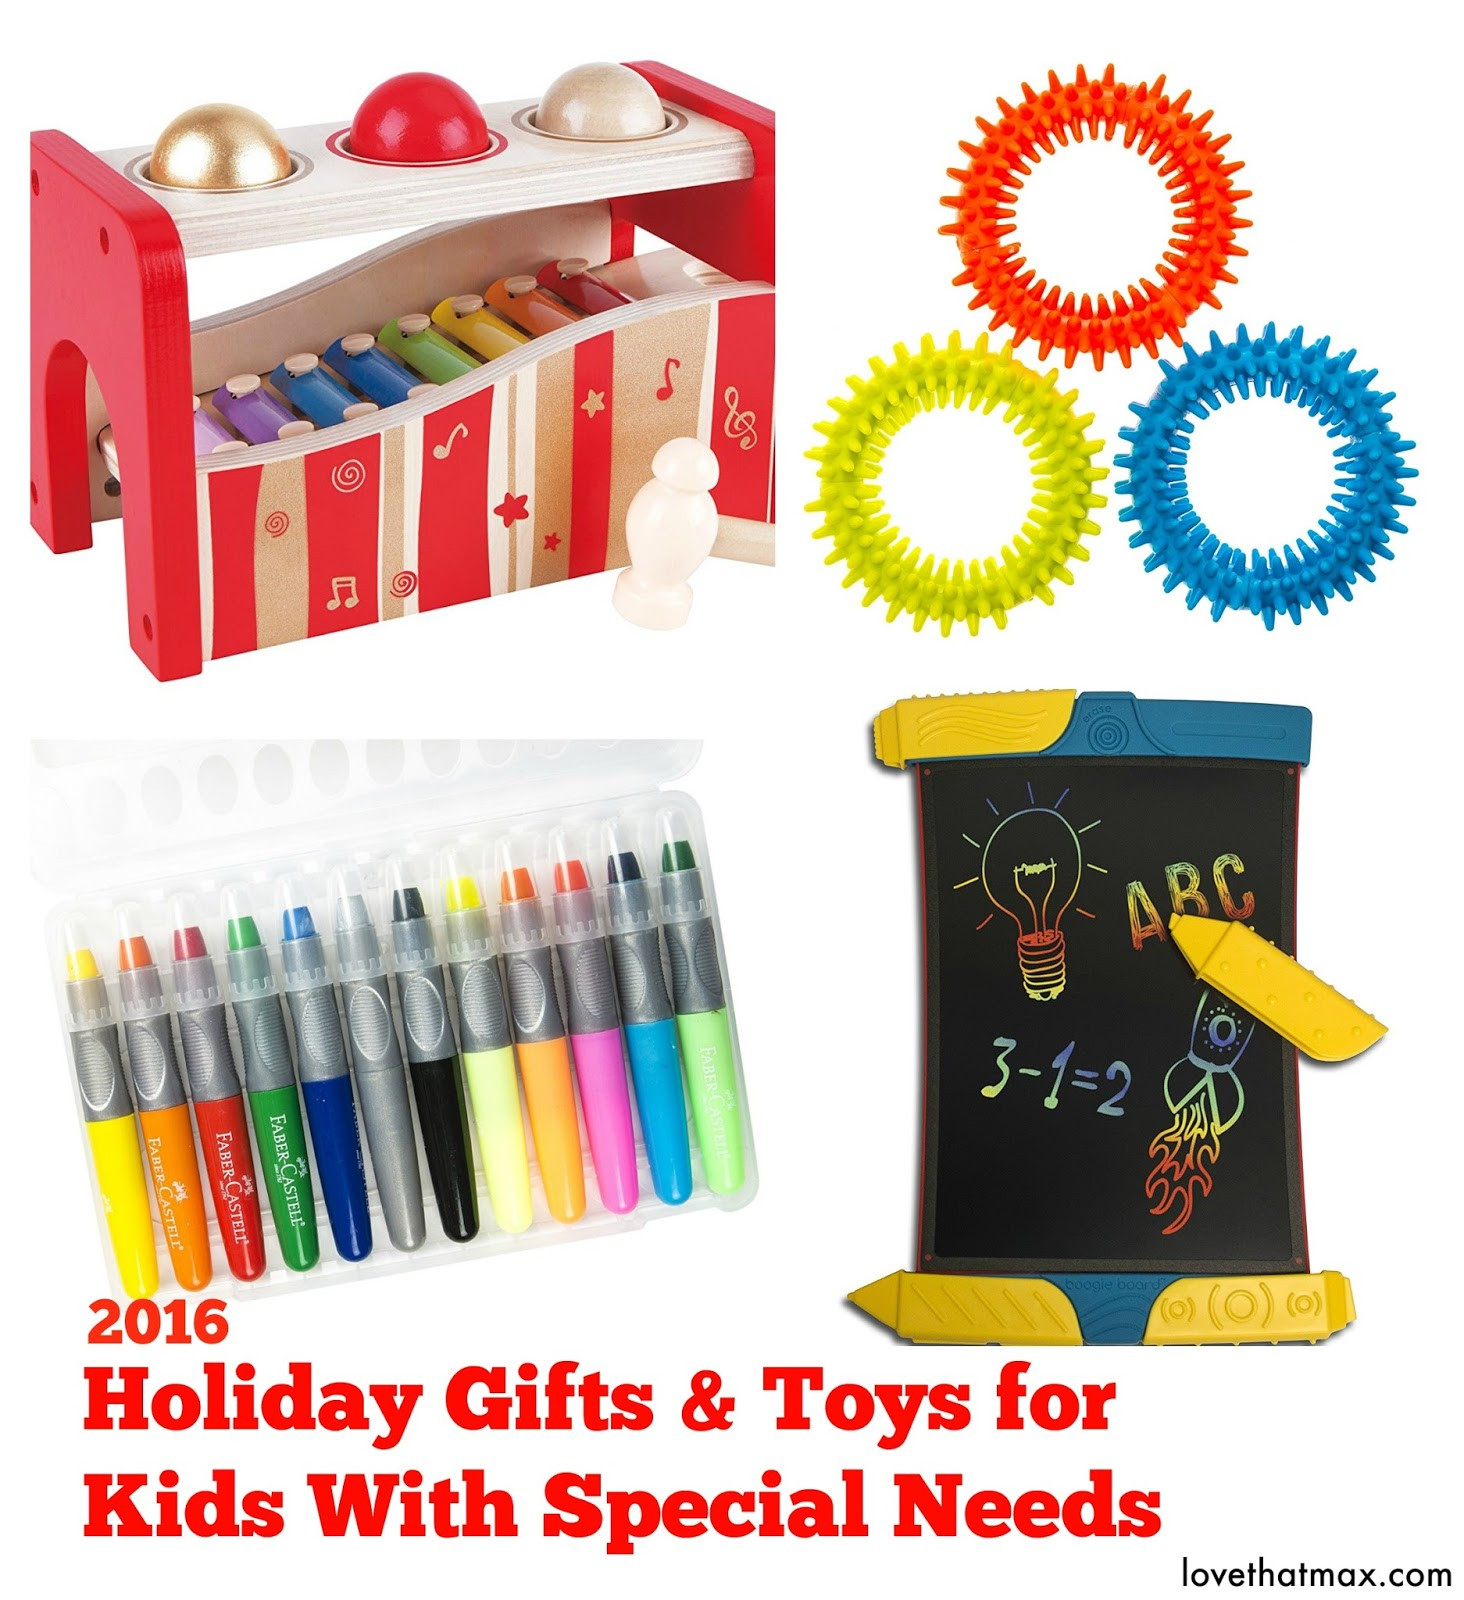 Gifts For Kids With Disabilities
 Love That Max Holiday ts and toys for kids with